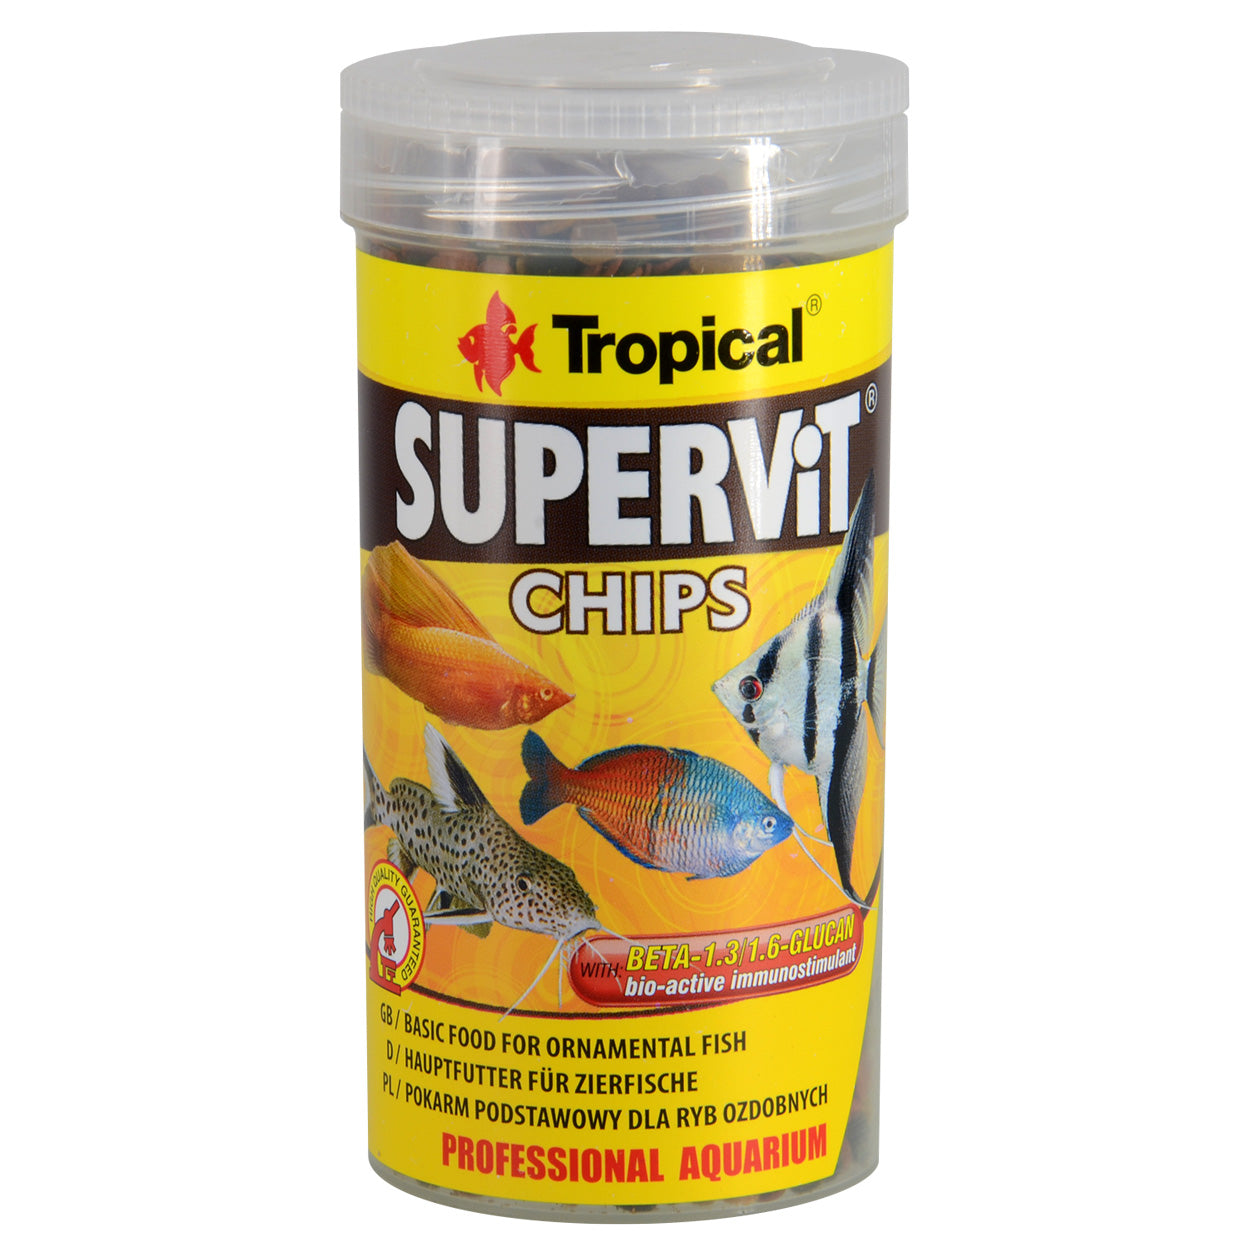 Tropical Supervit Sinking Chips